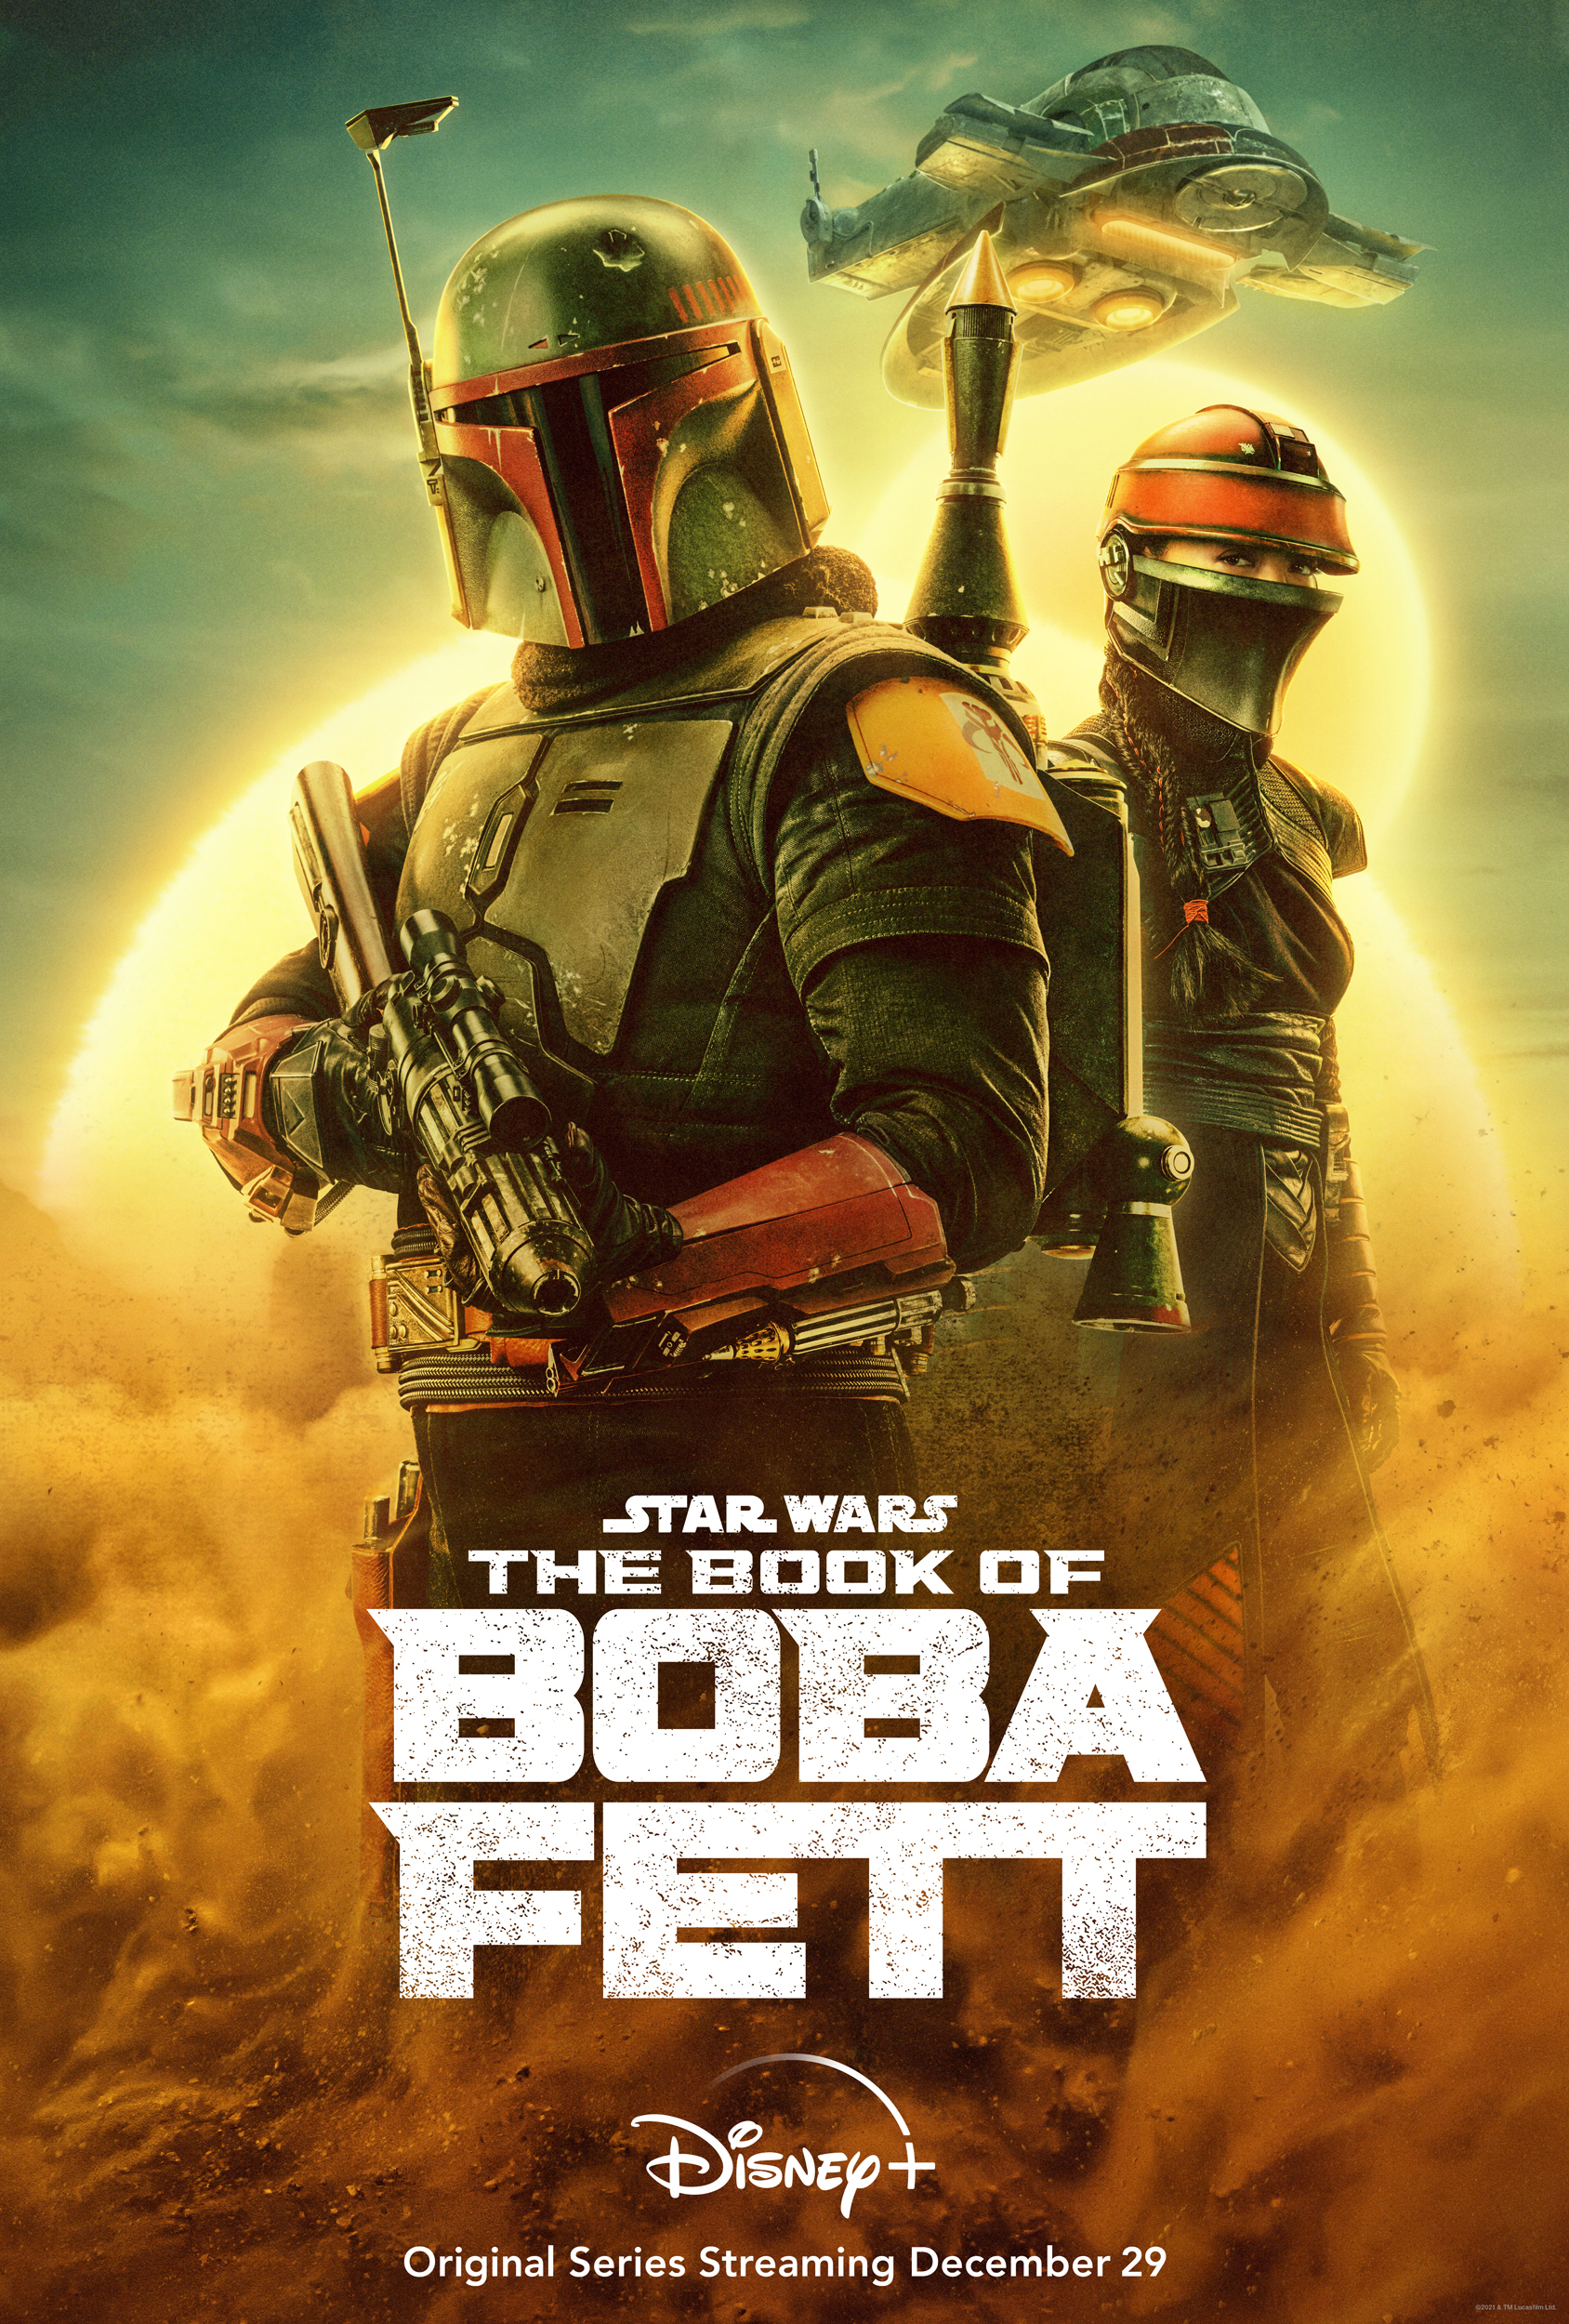 What is Star Wars: The Book of Boba Fett?